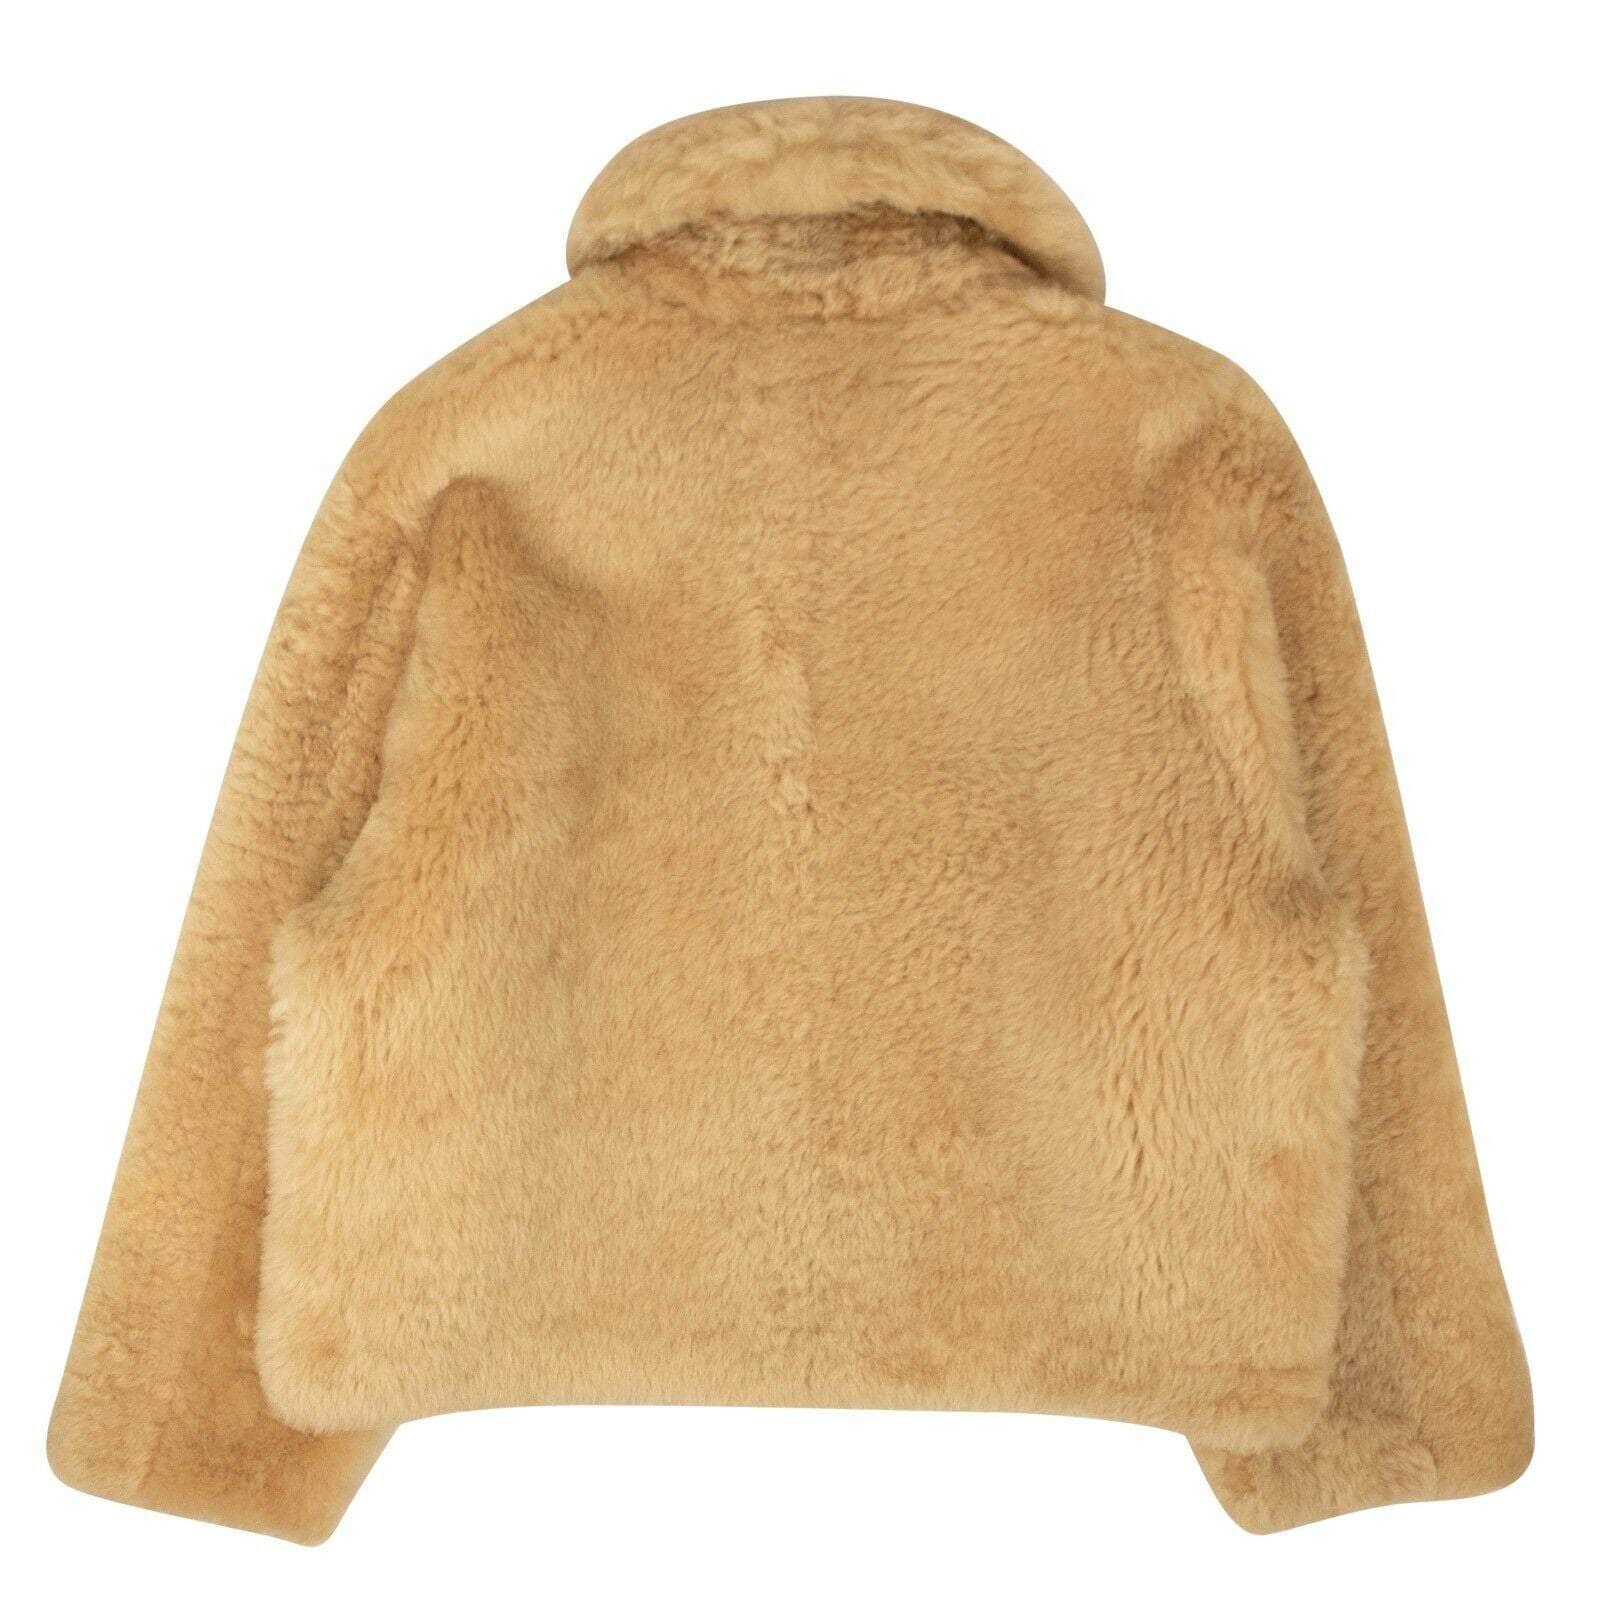 ERL 1000-2000, channelenable-all, chicmi, couponcollection, erl, gender-mens, gender-womens, main-clothing, mens-shoes, size-m, size-s M / ERL05C007_1 Beige Shearling Leather Coat ERL-XOTW-0001/M ERL-XOTW-0001/M